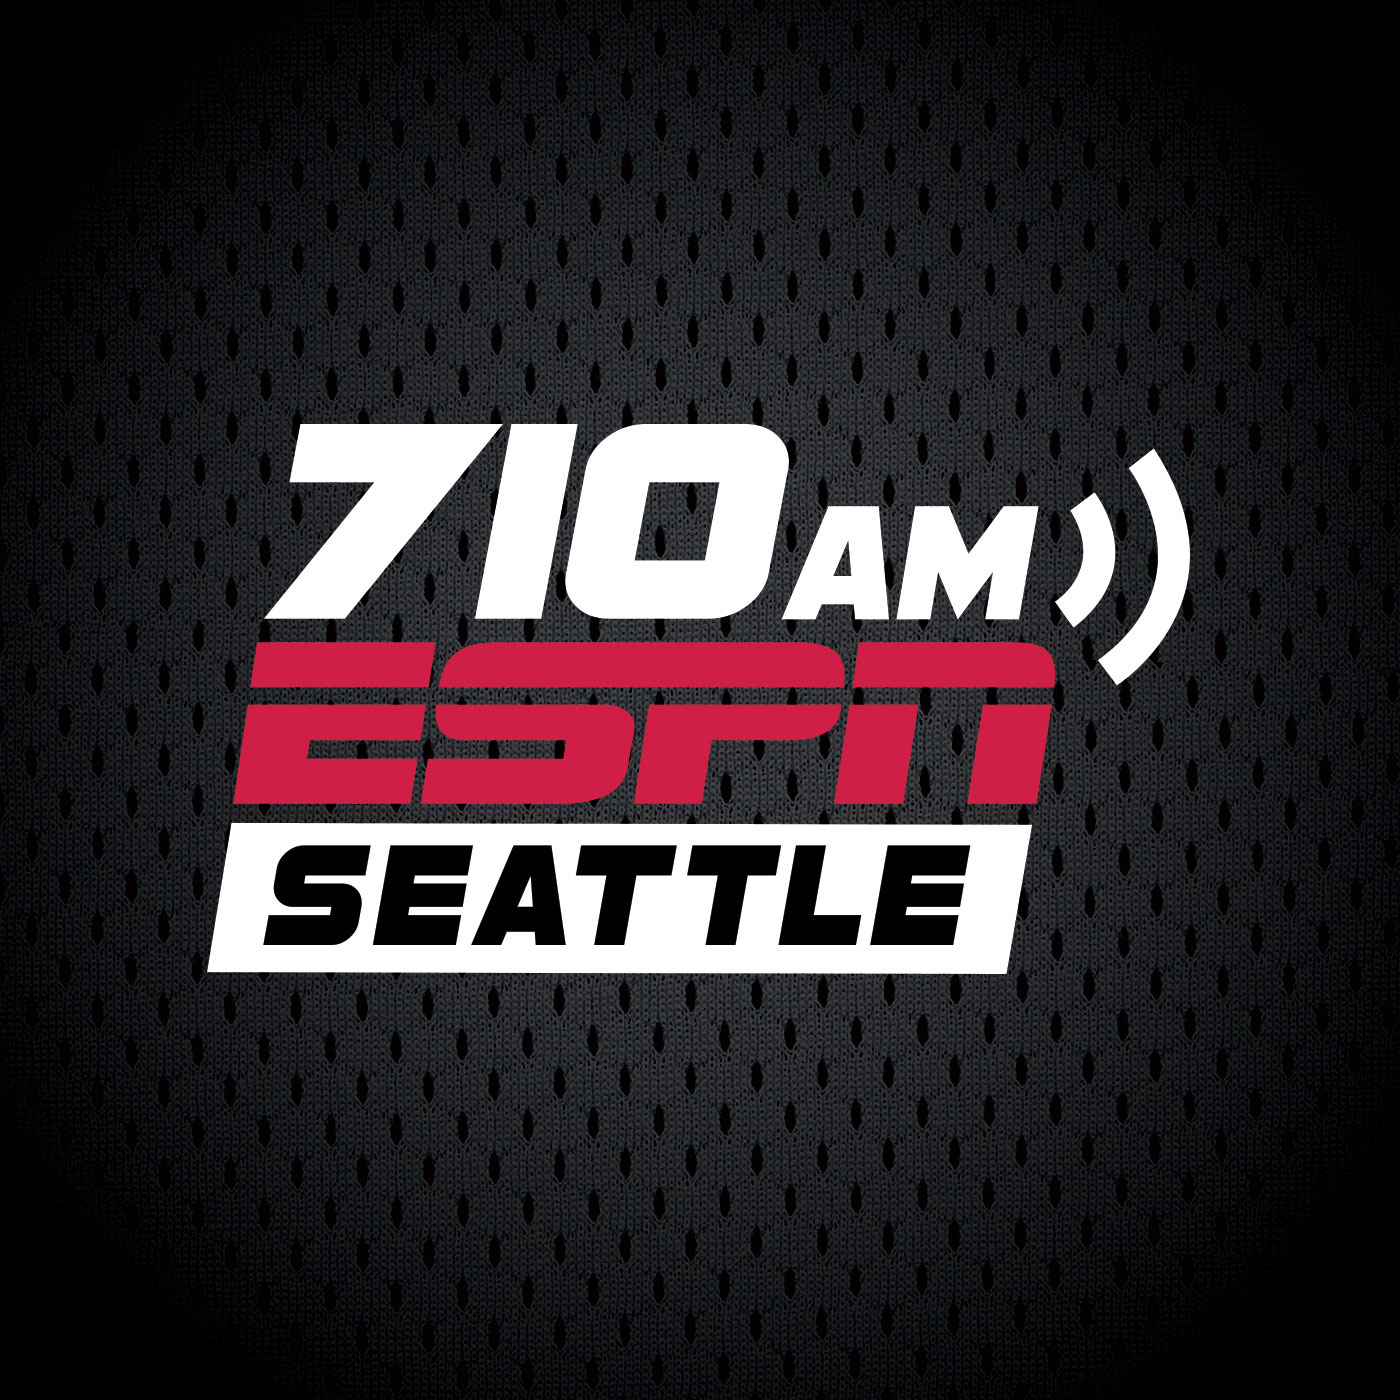 Hour 2 - Seahawks wide receiver, Tyler Lockett joins the show!